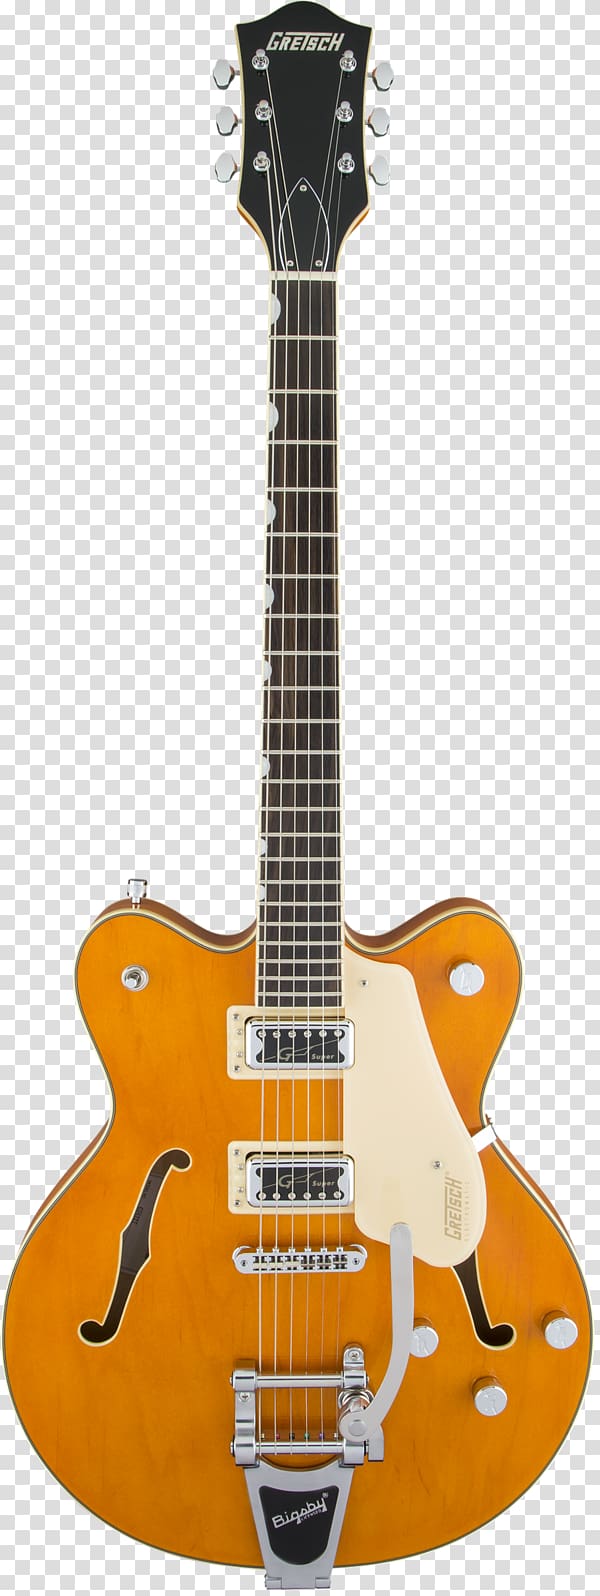 Gretsch Semi-acoustic guitar Bigsby vibrato tailpiece Archtop guitar, electric guitar transparent background PNG clipart